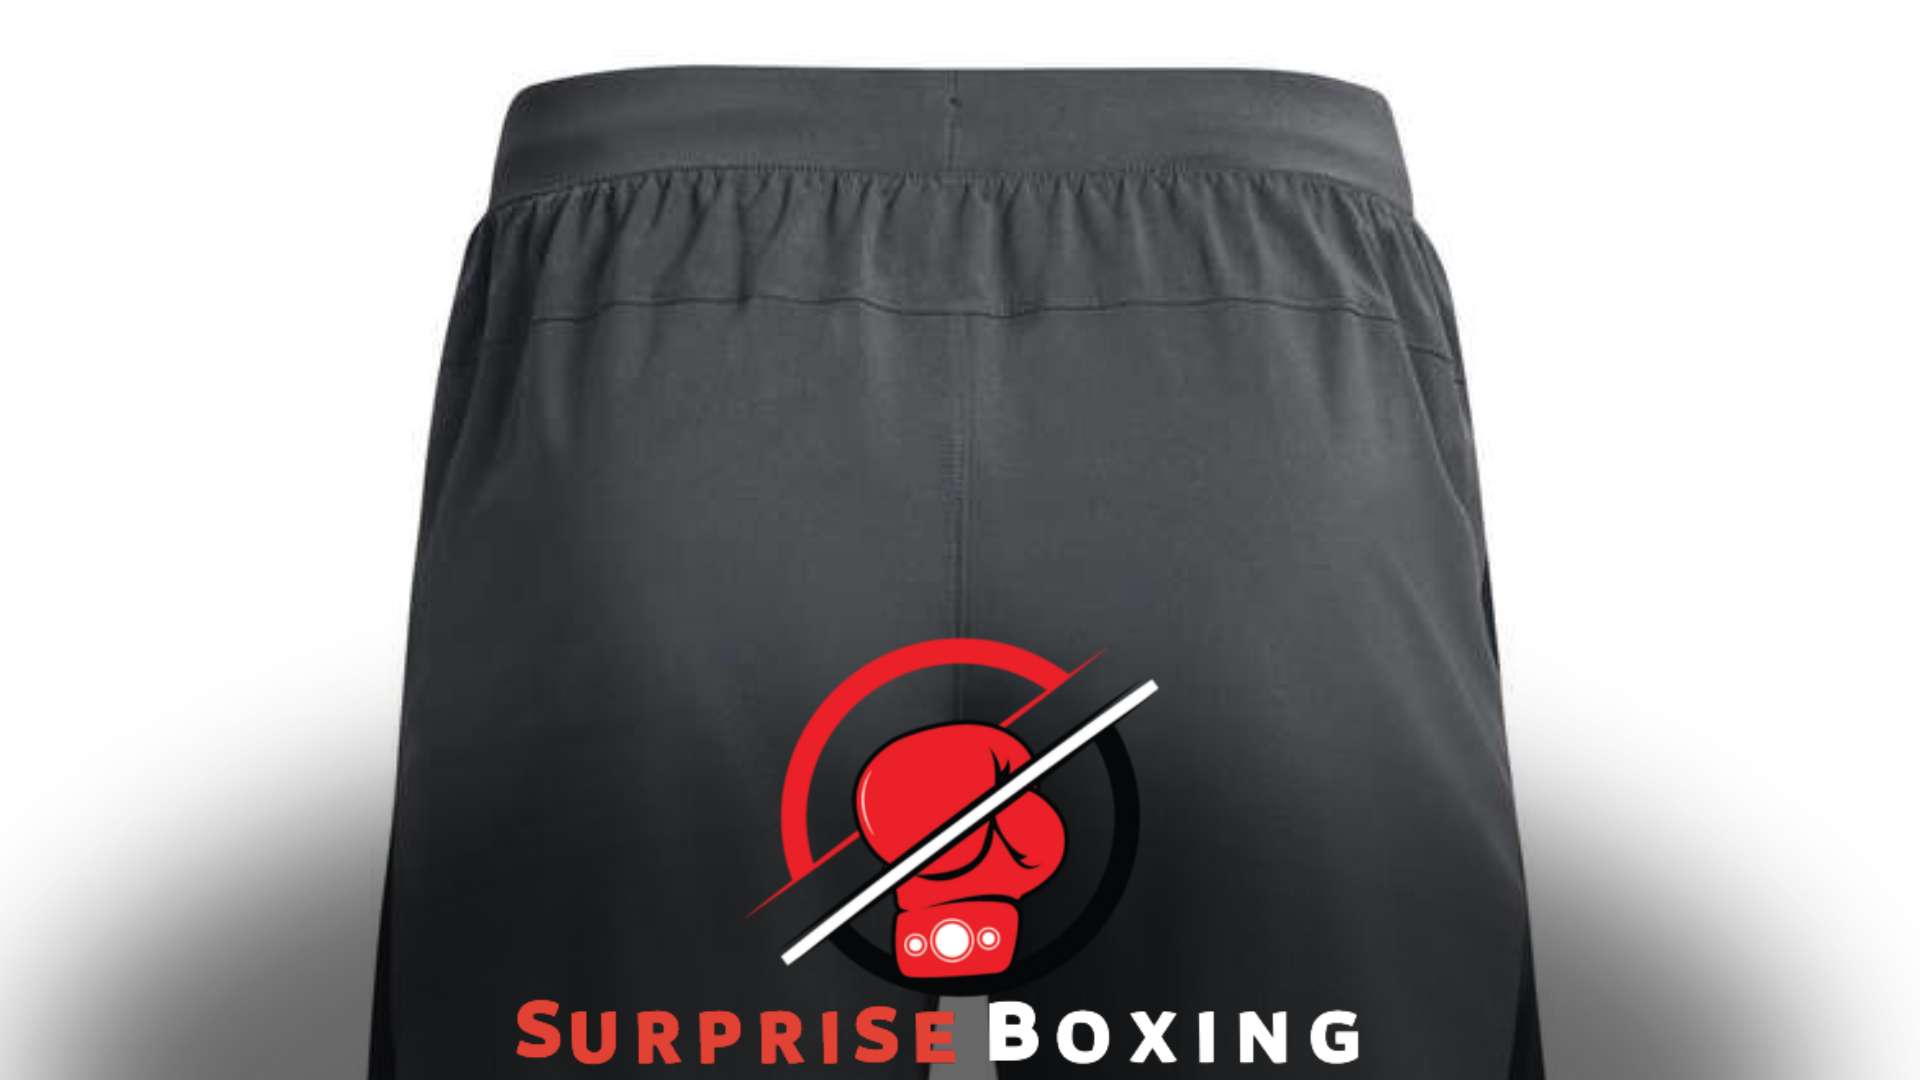 Navigating Boxing Shorts Sizing: What Size is Appropriate for a Men's Waist 30?